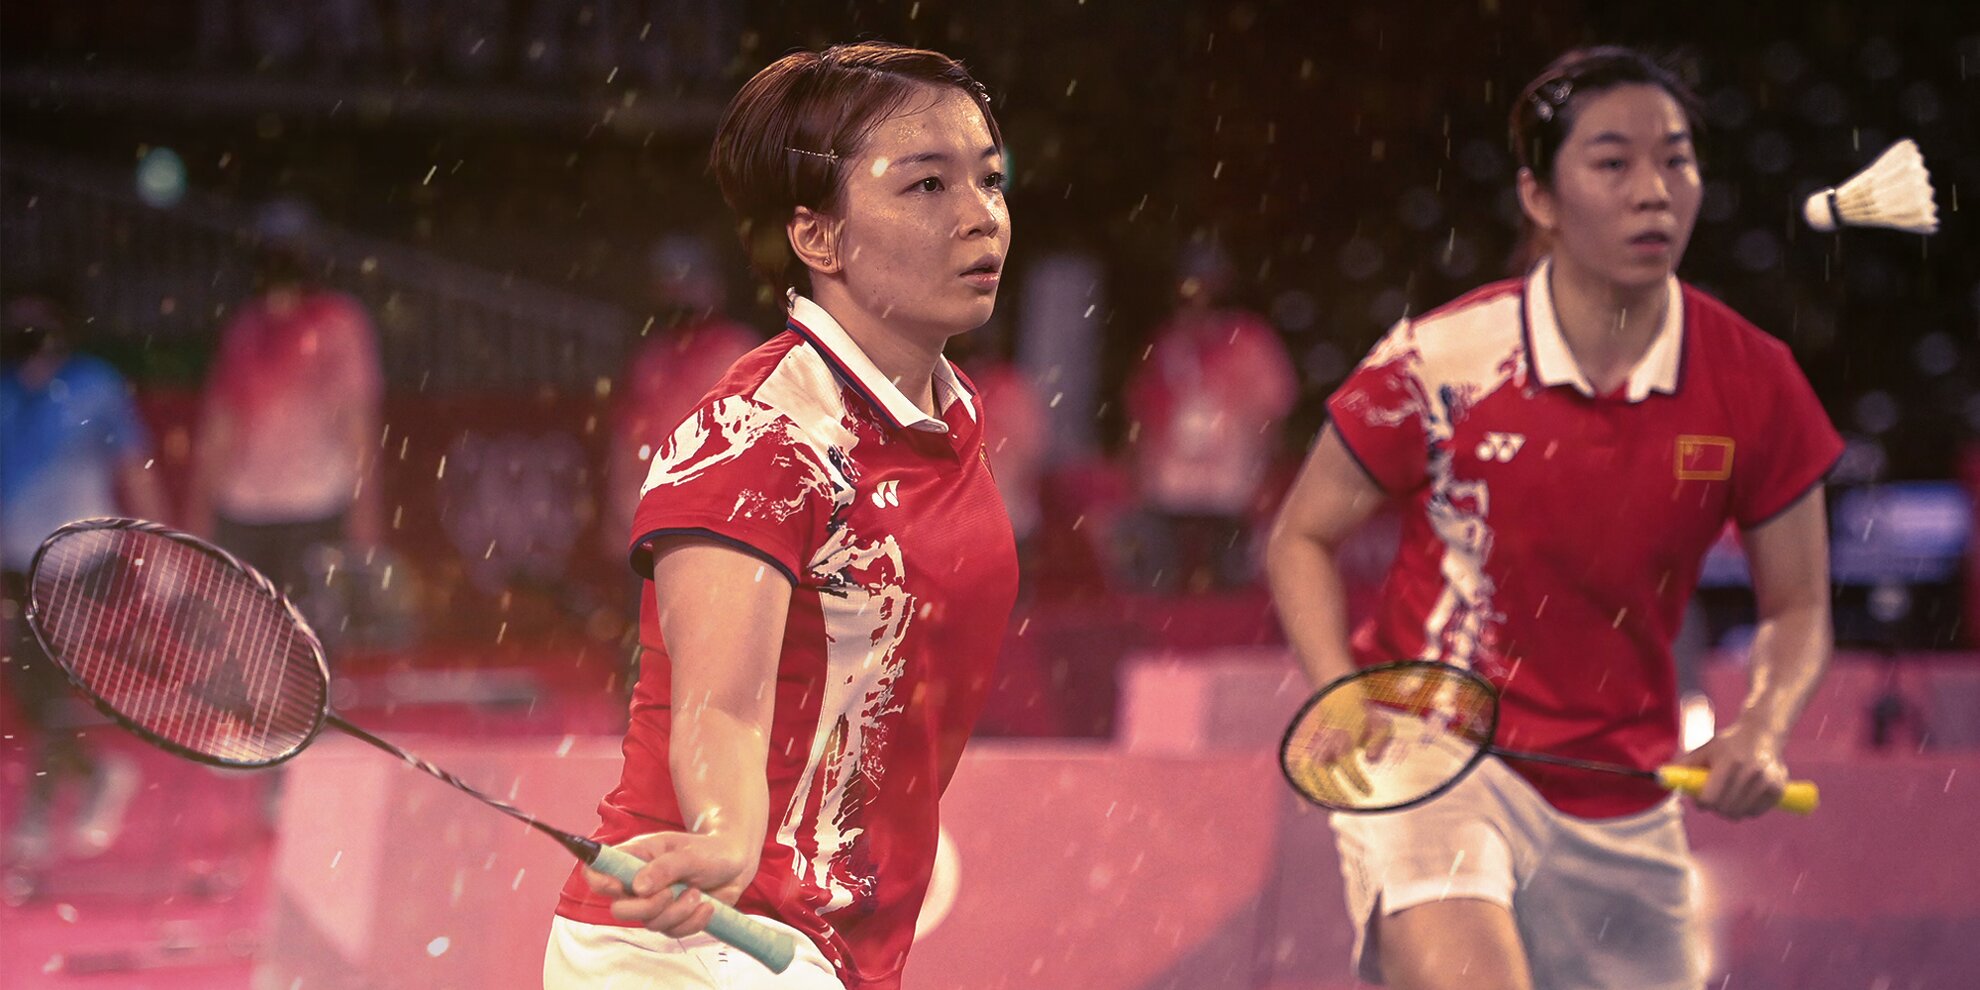 Uber Cup